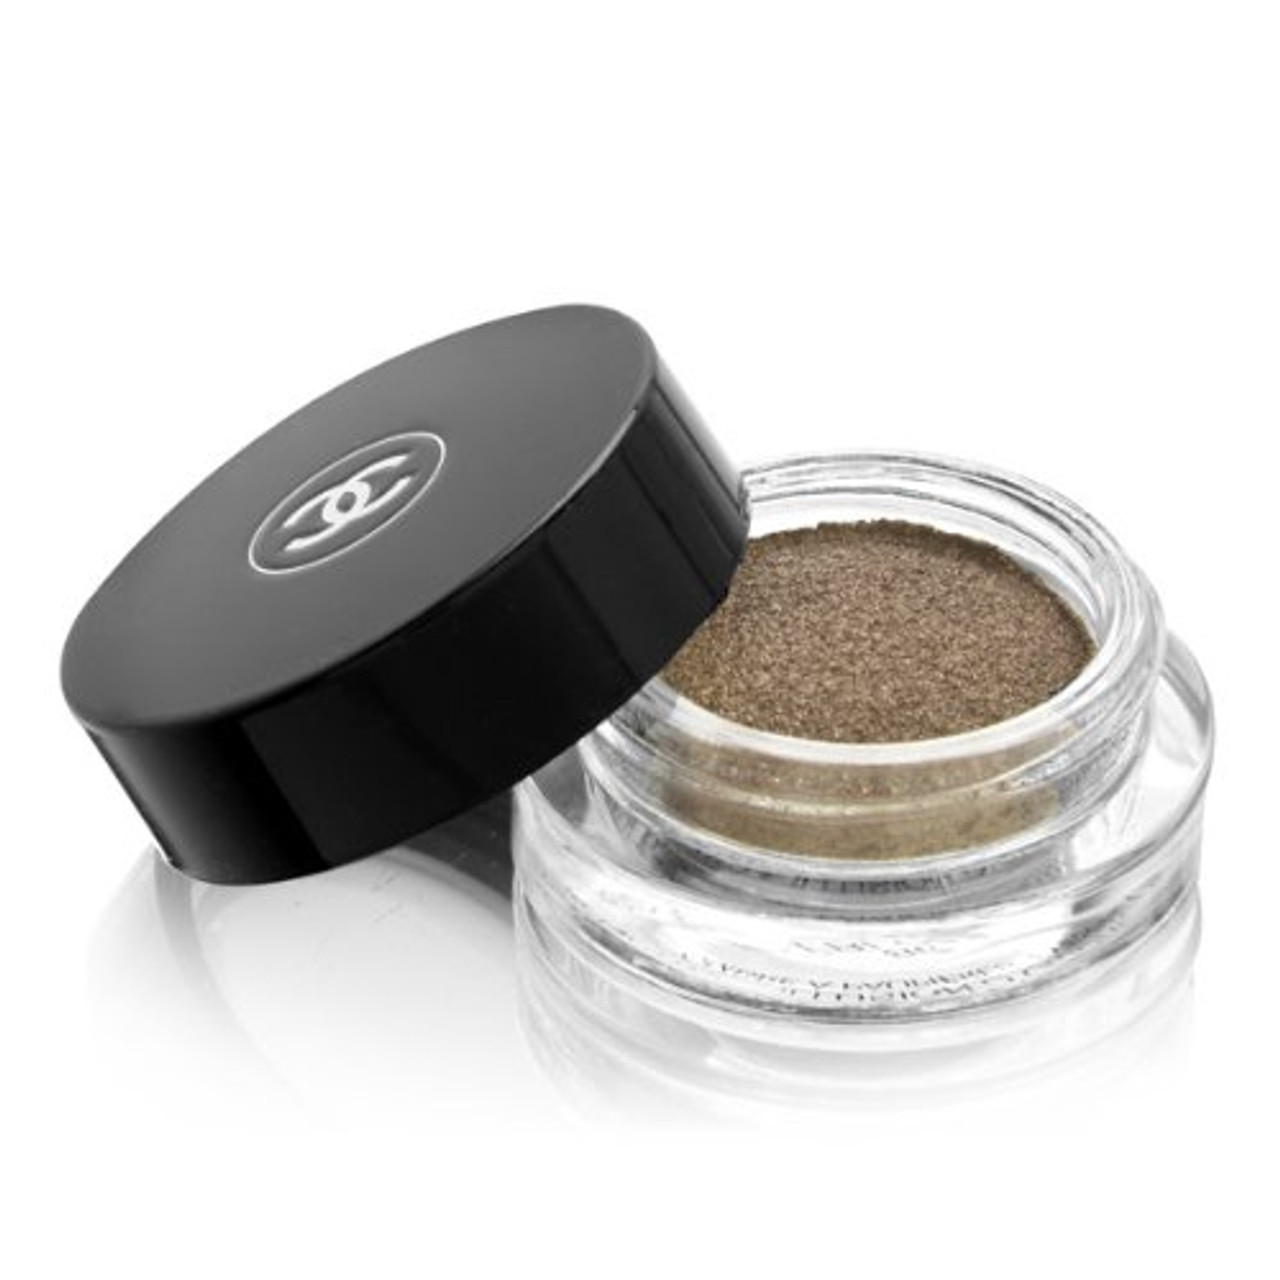 Chanel Illusion d'Ombre Long Wear Luminous Eyeshadow 817 Apparence